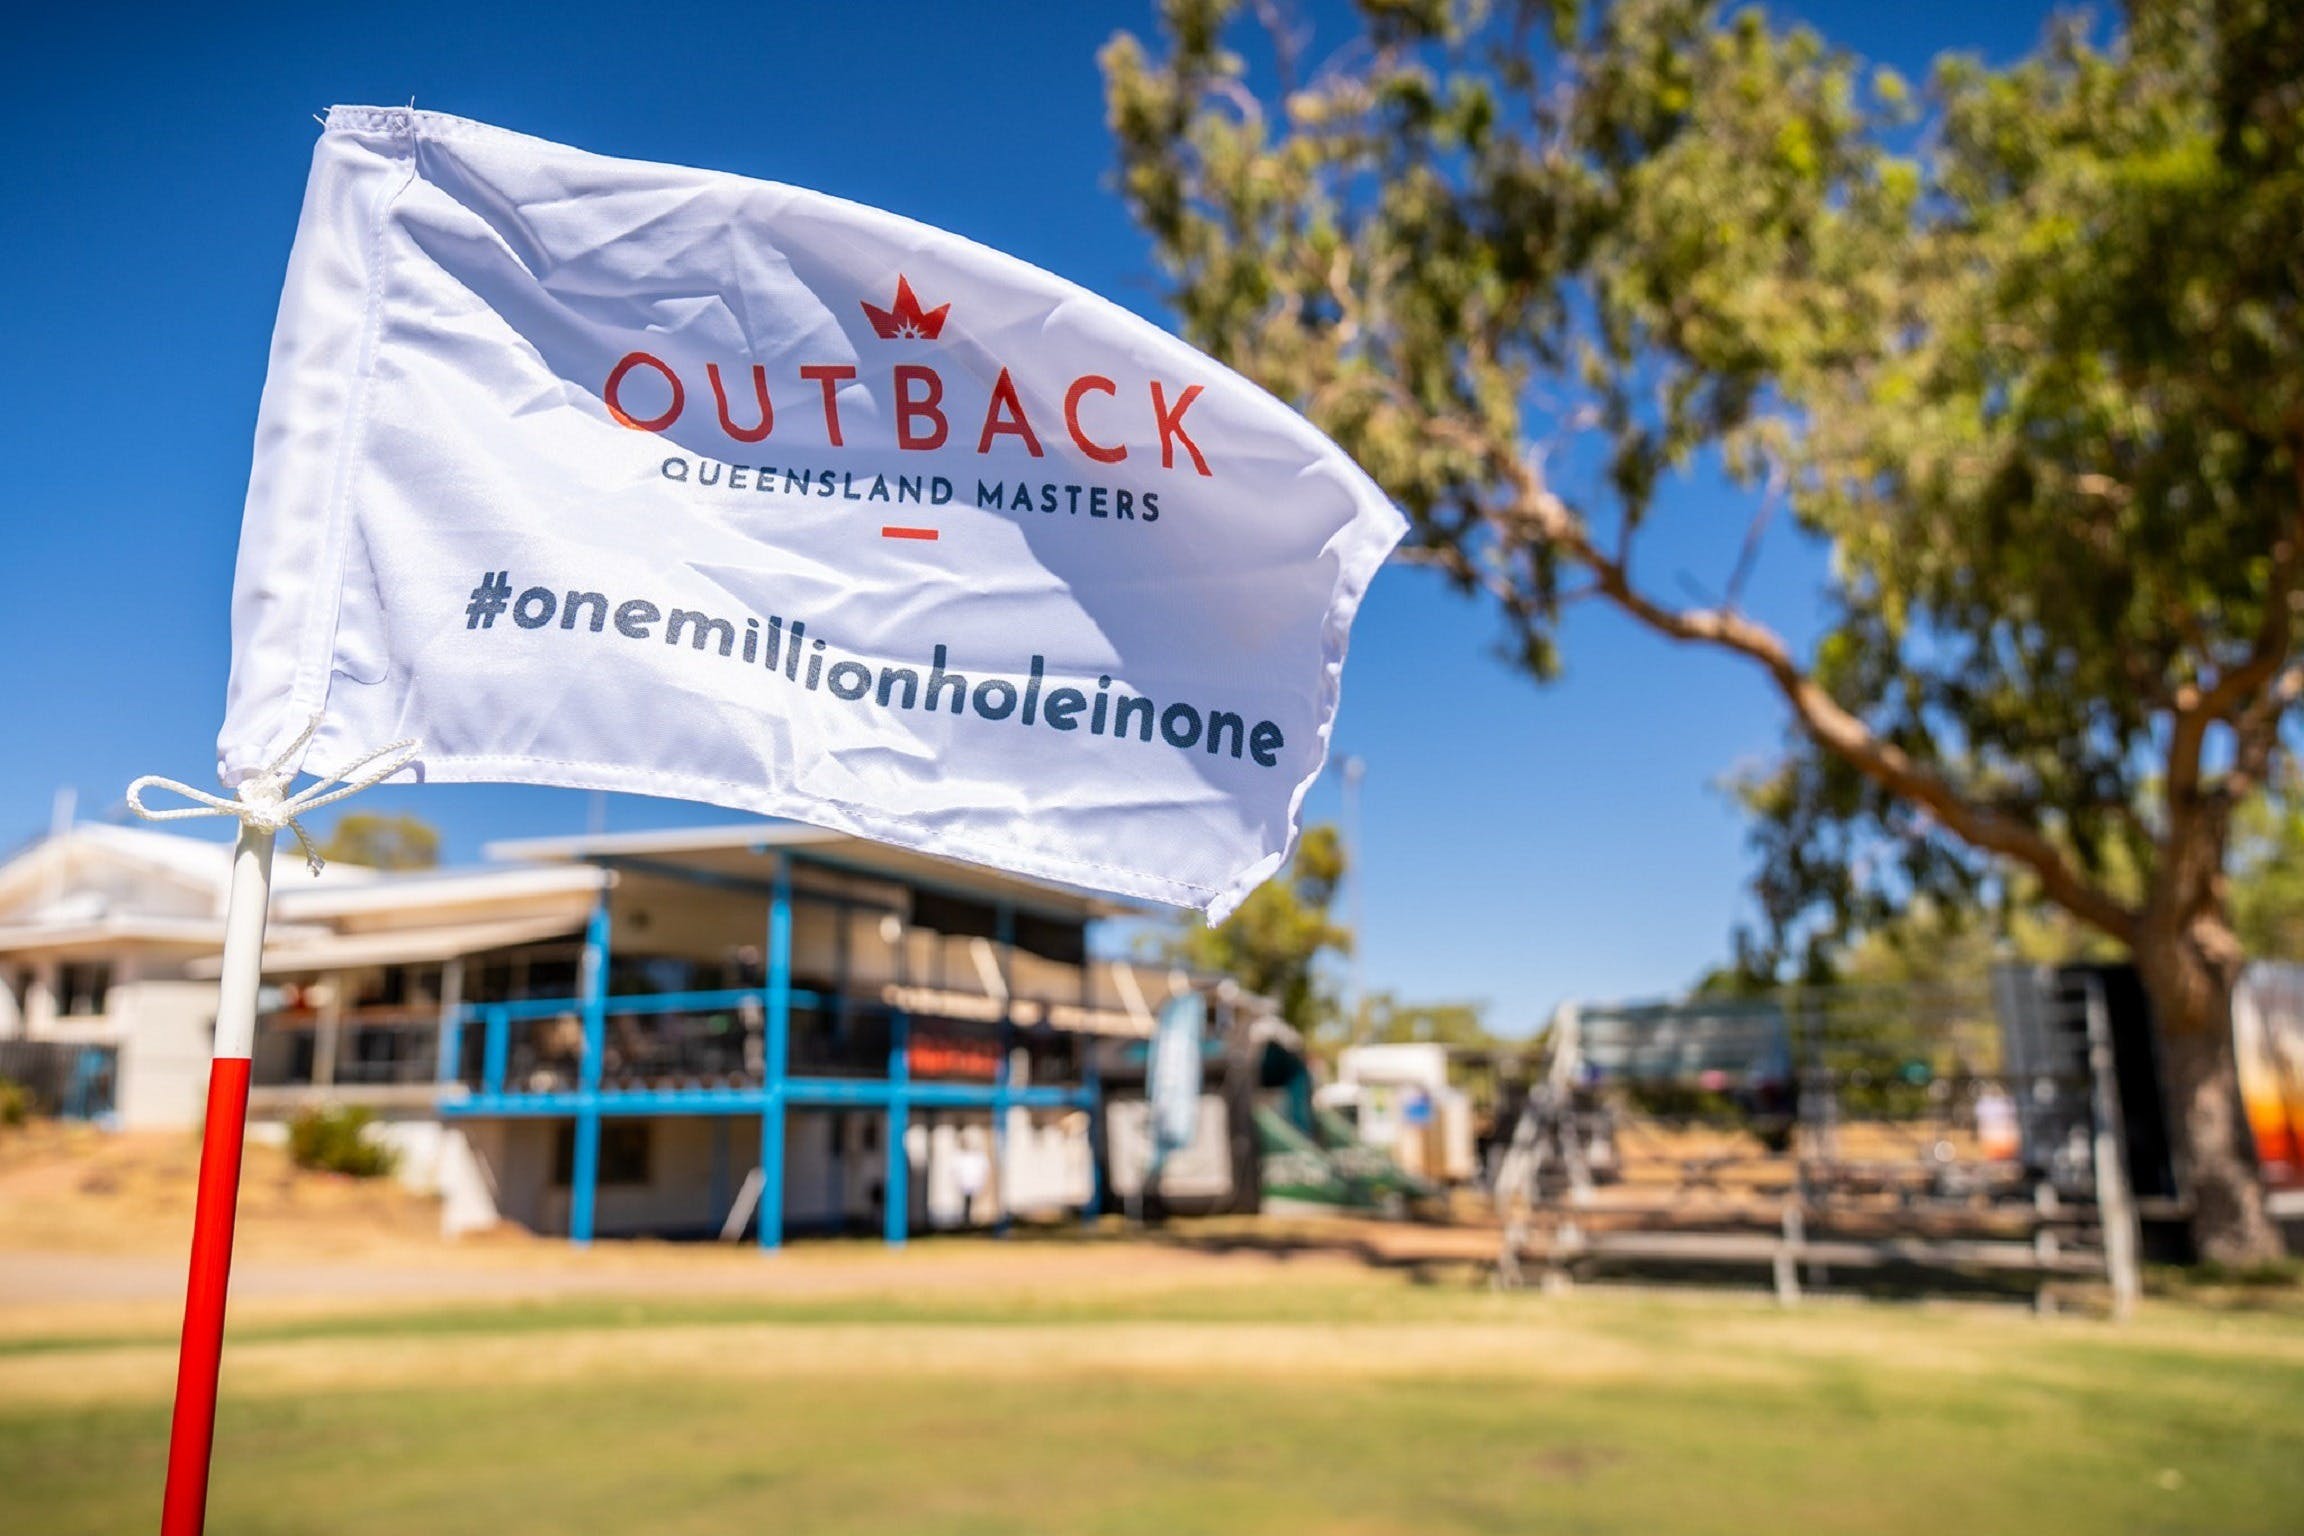 Outback Queensland Masters Charleville Leg 2021 - Accommodation Bookings